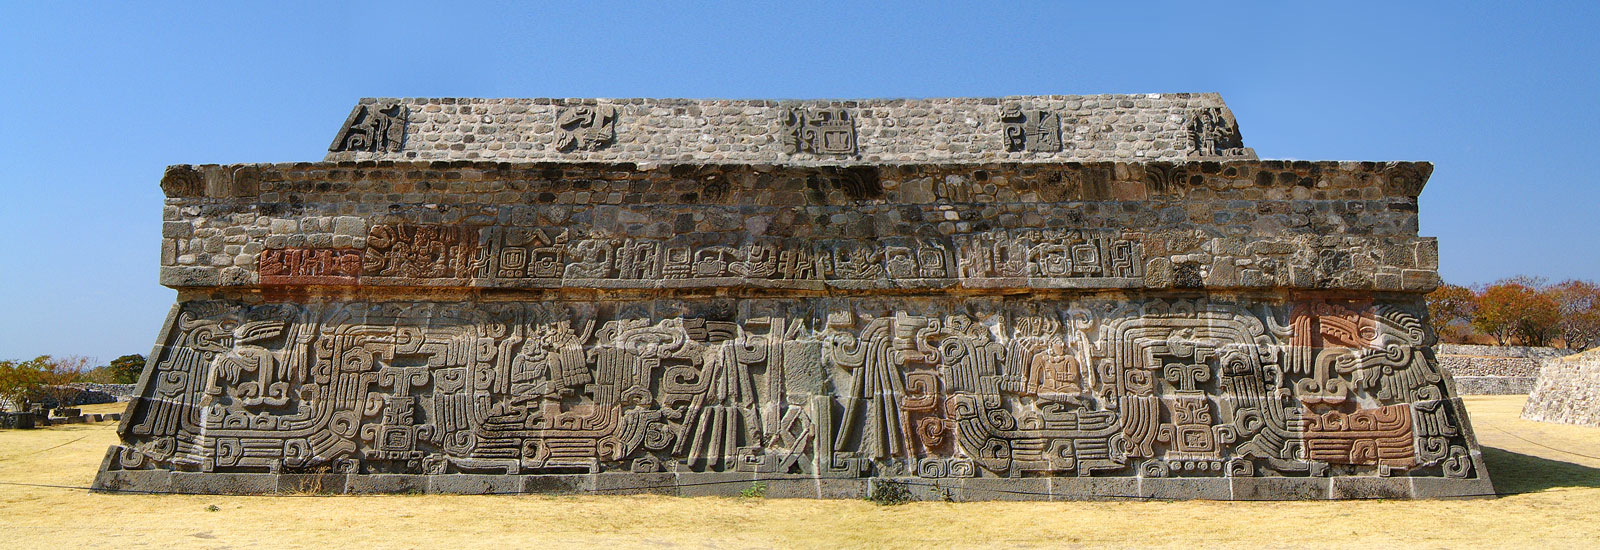 Pyramid of the Plumed Serpent at Xochicalco